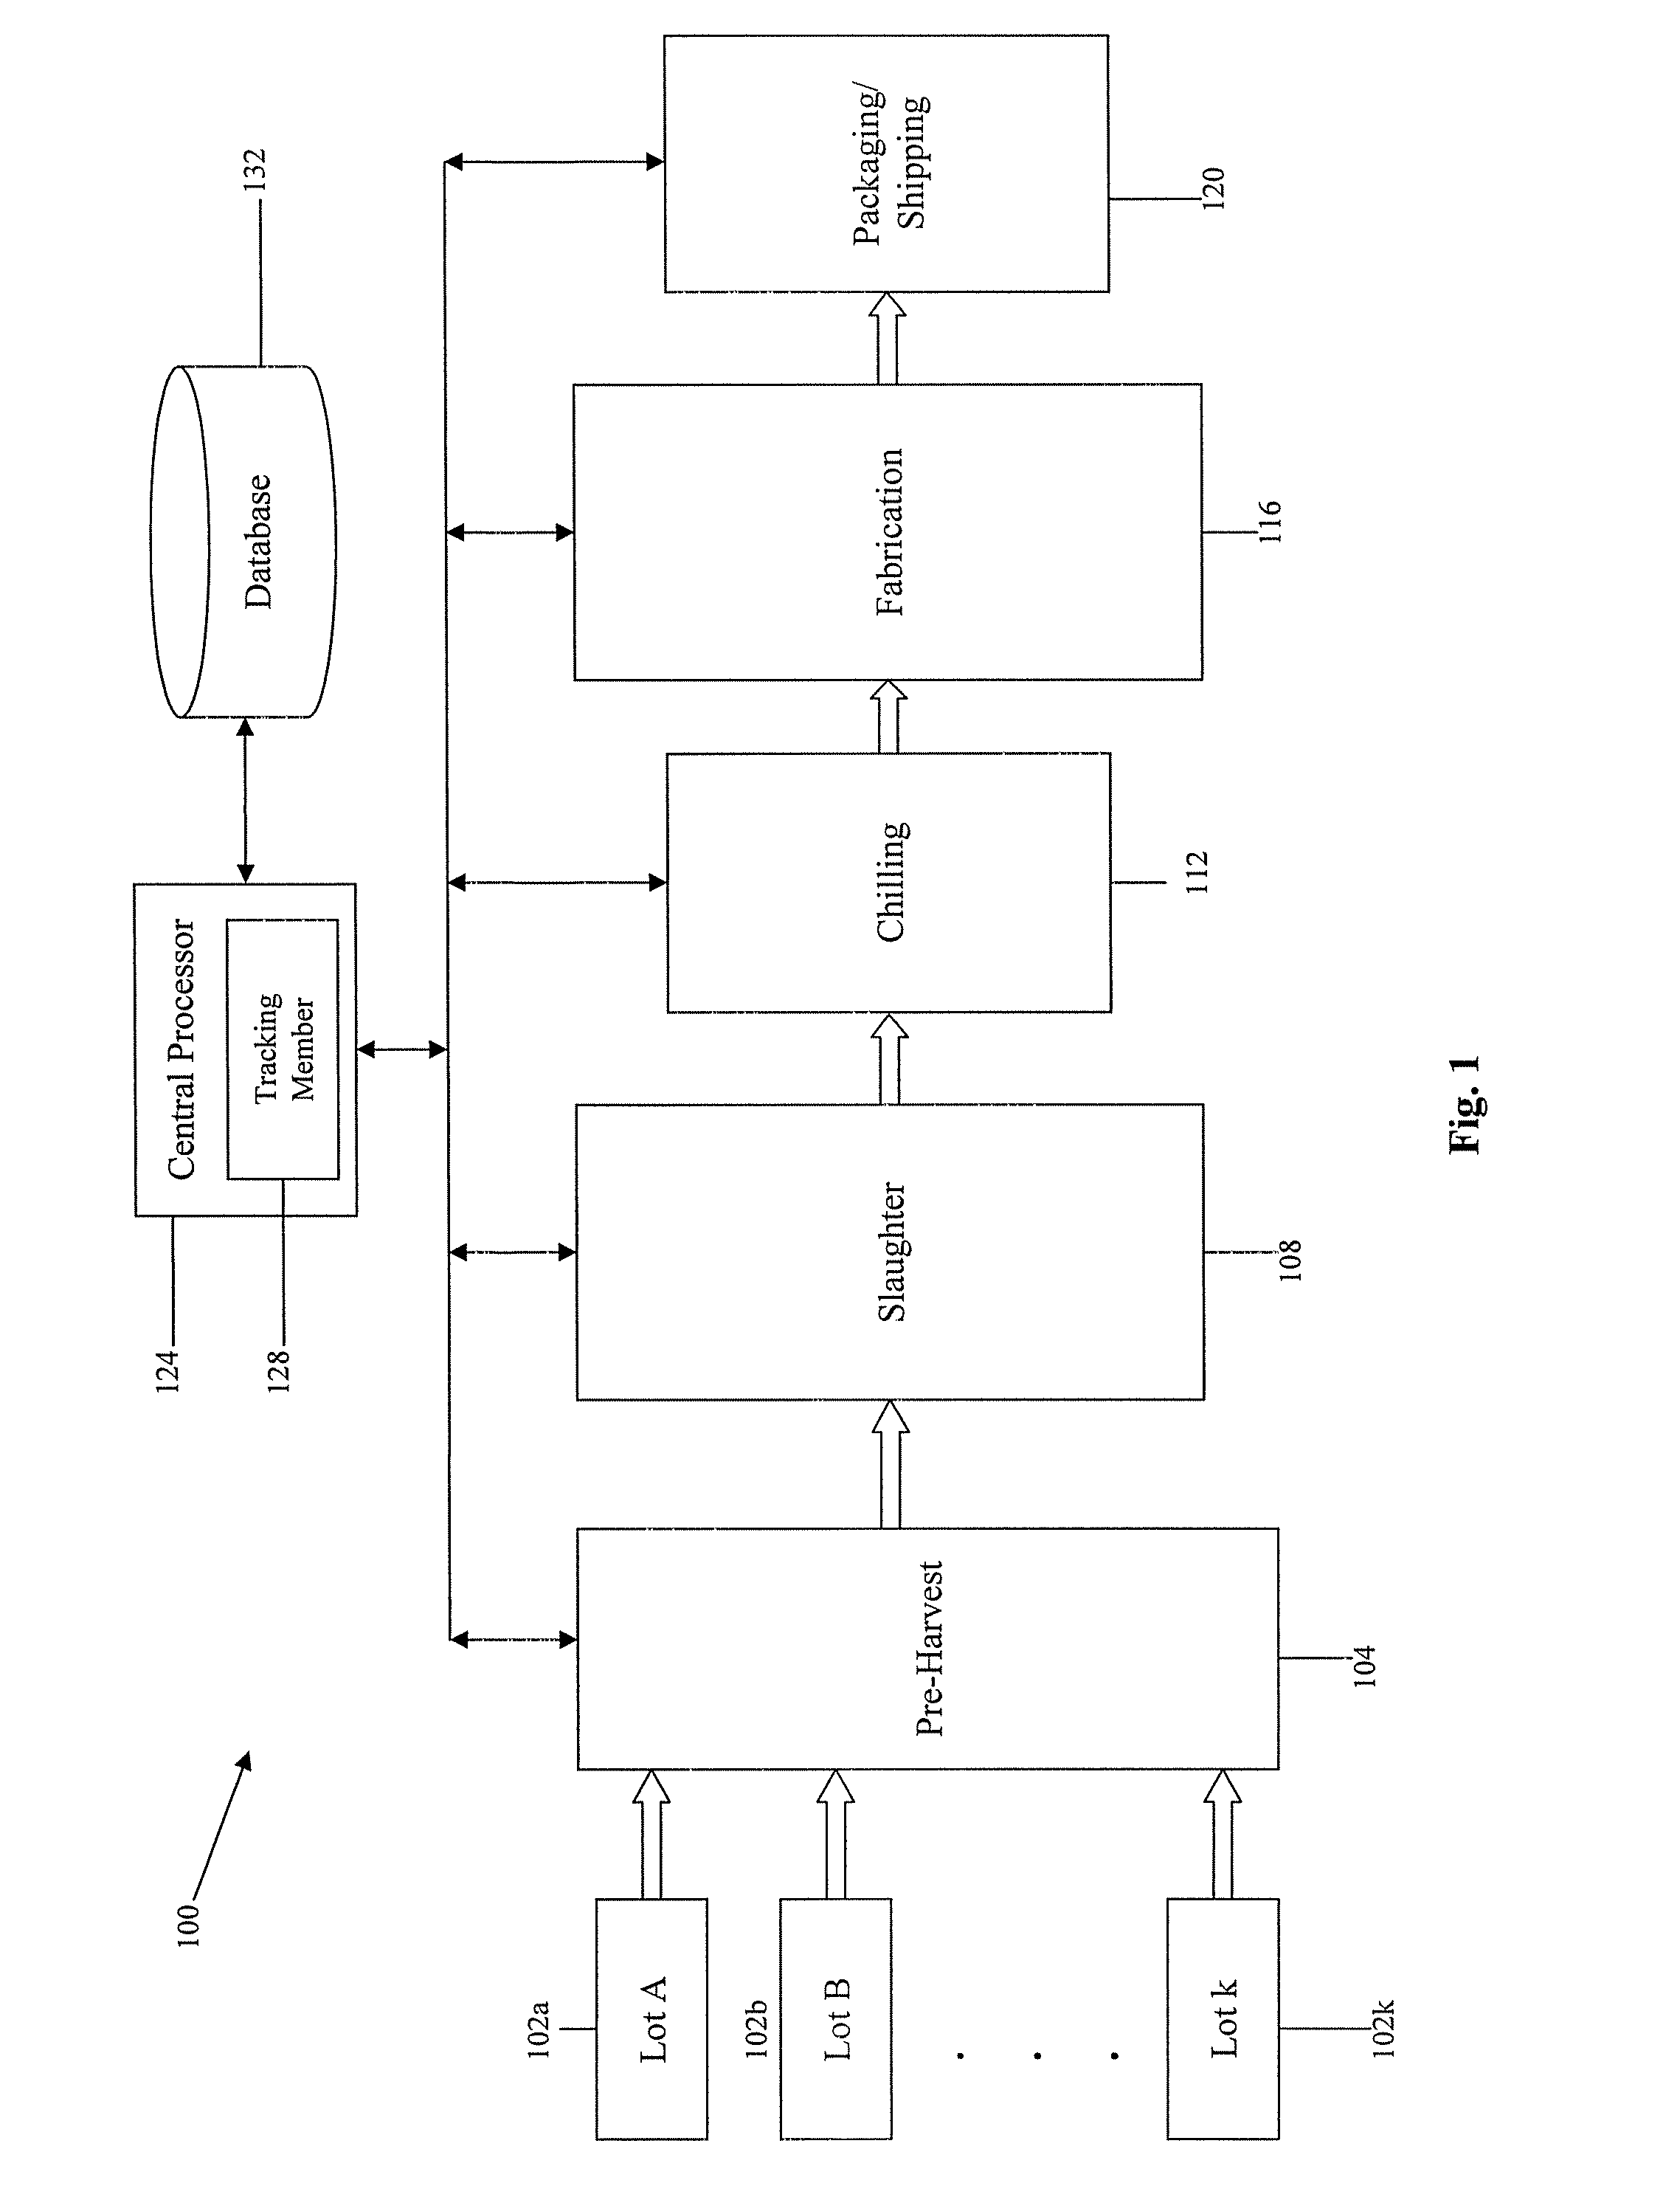 Methods and Systems for Administering a Drug Program Related to Livestock